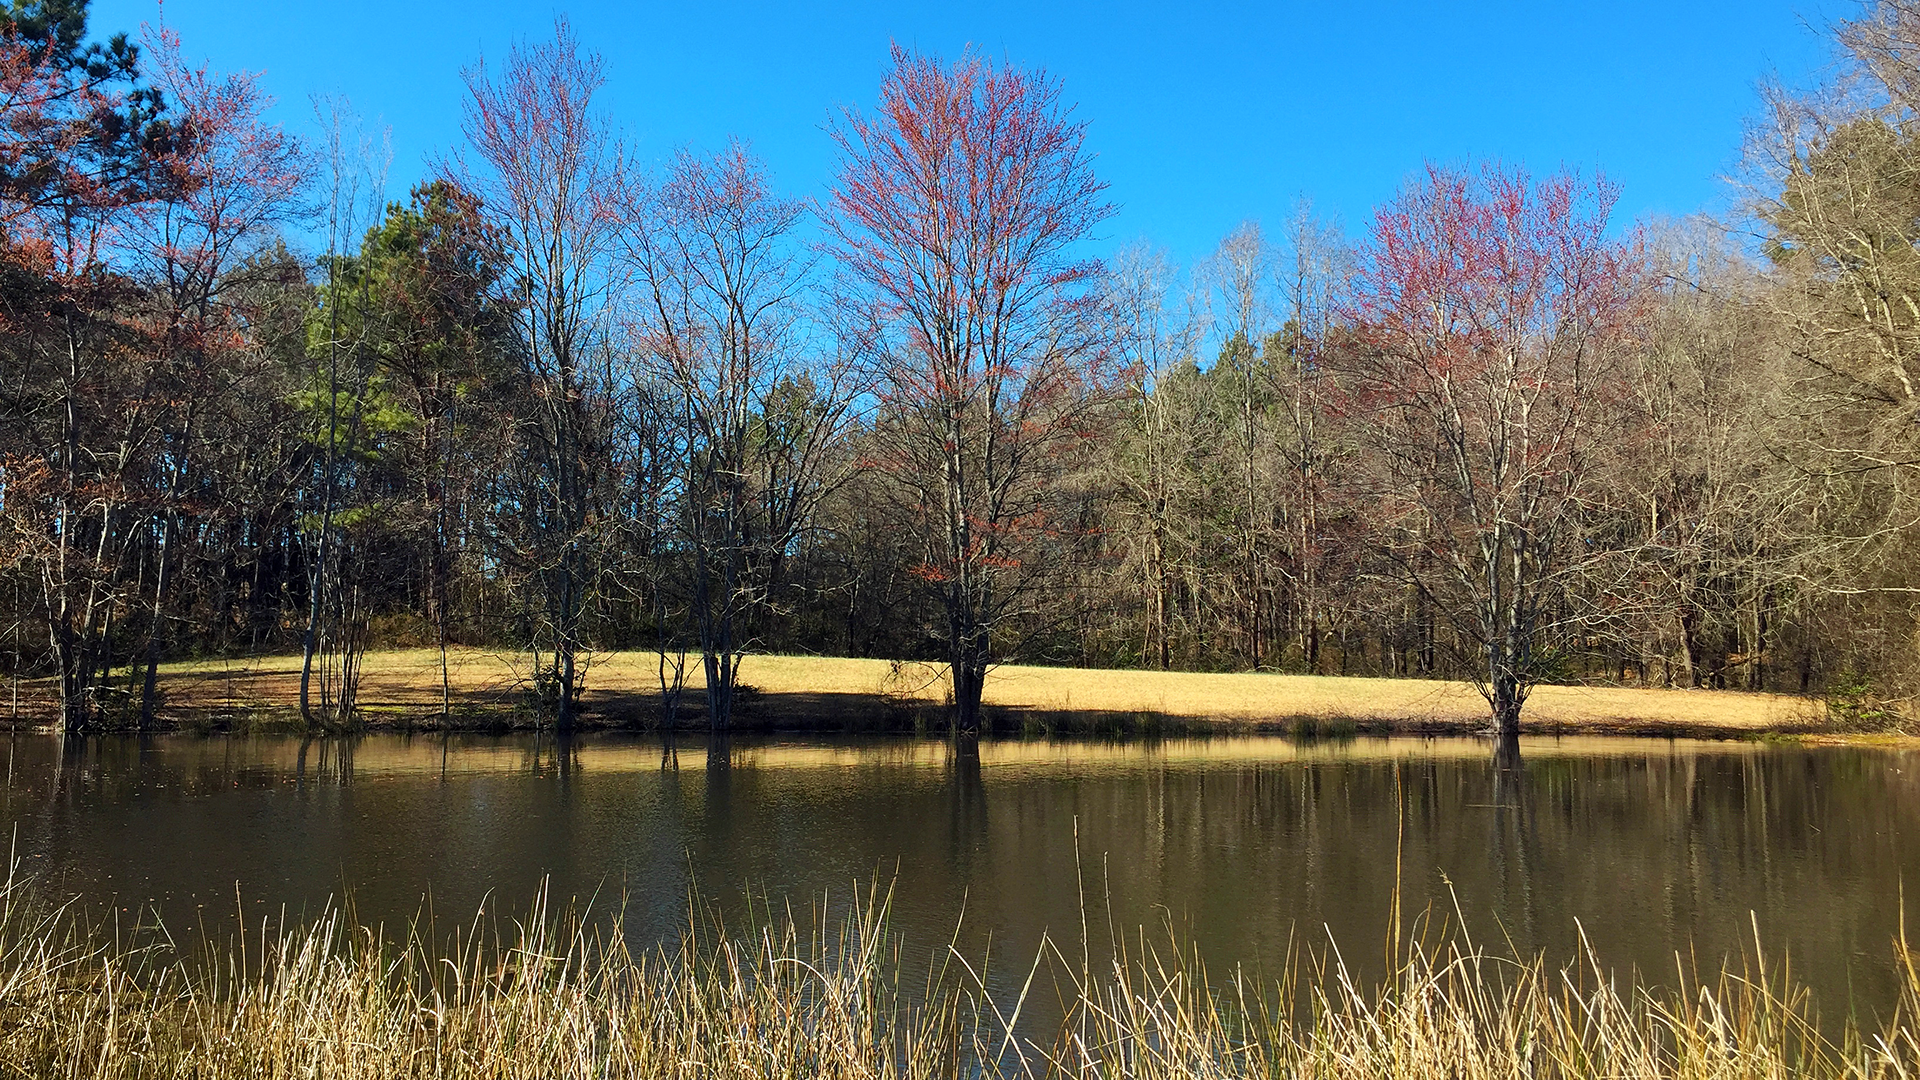 farm pond march 4 2021 68 degrees and sunny in Spartanburg South Carolina County